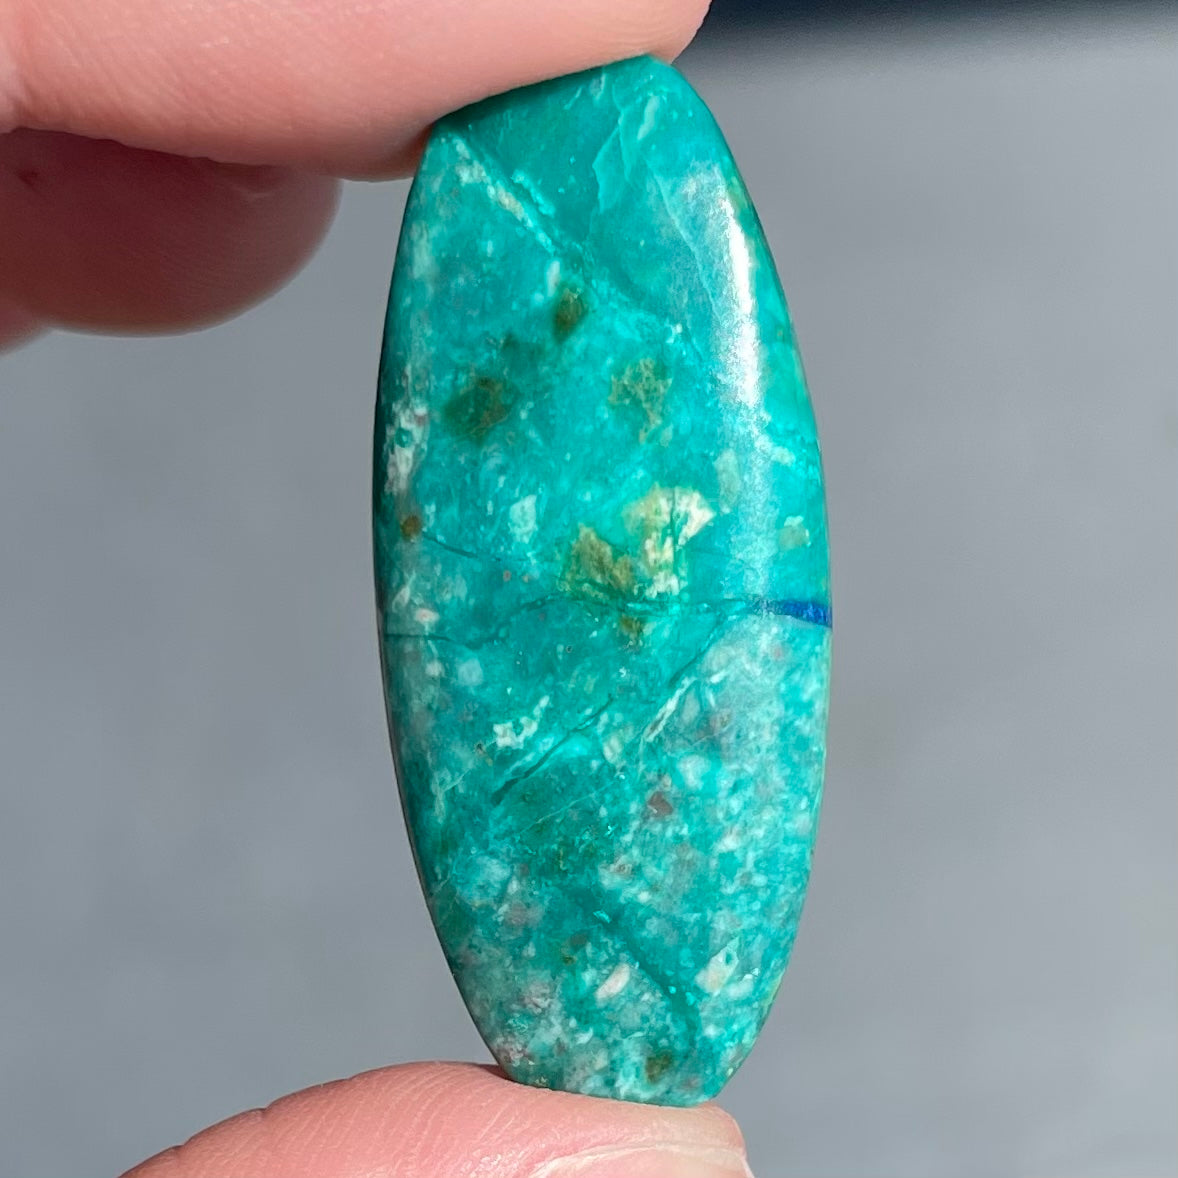 A loose, oval cabochon cut chrysocolla stone with blue azurite inclusions.